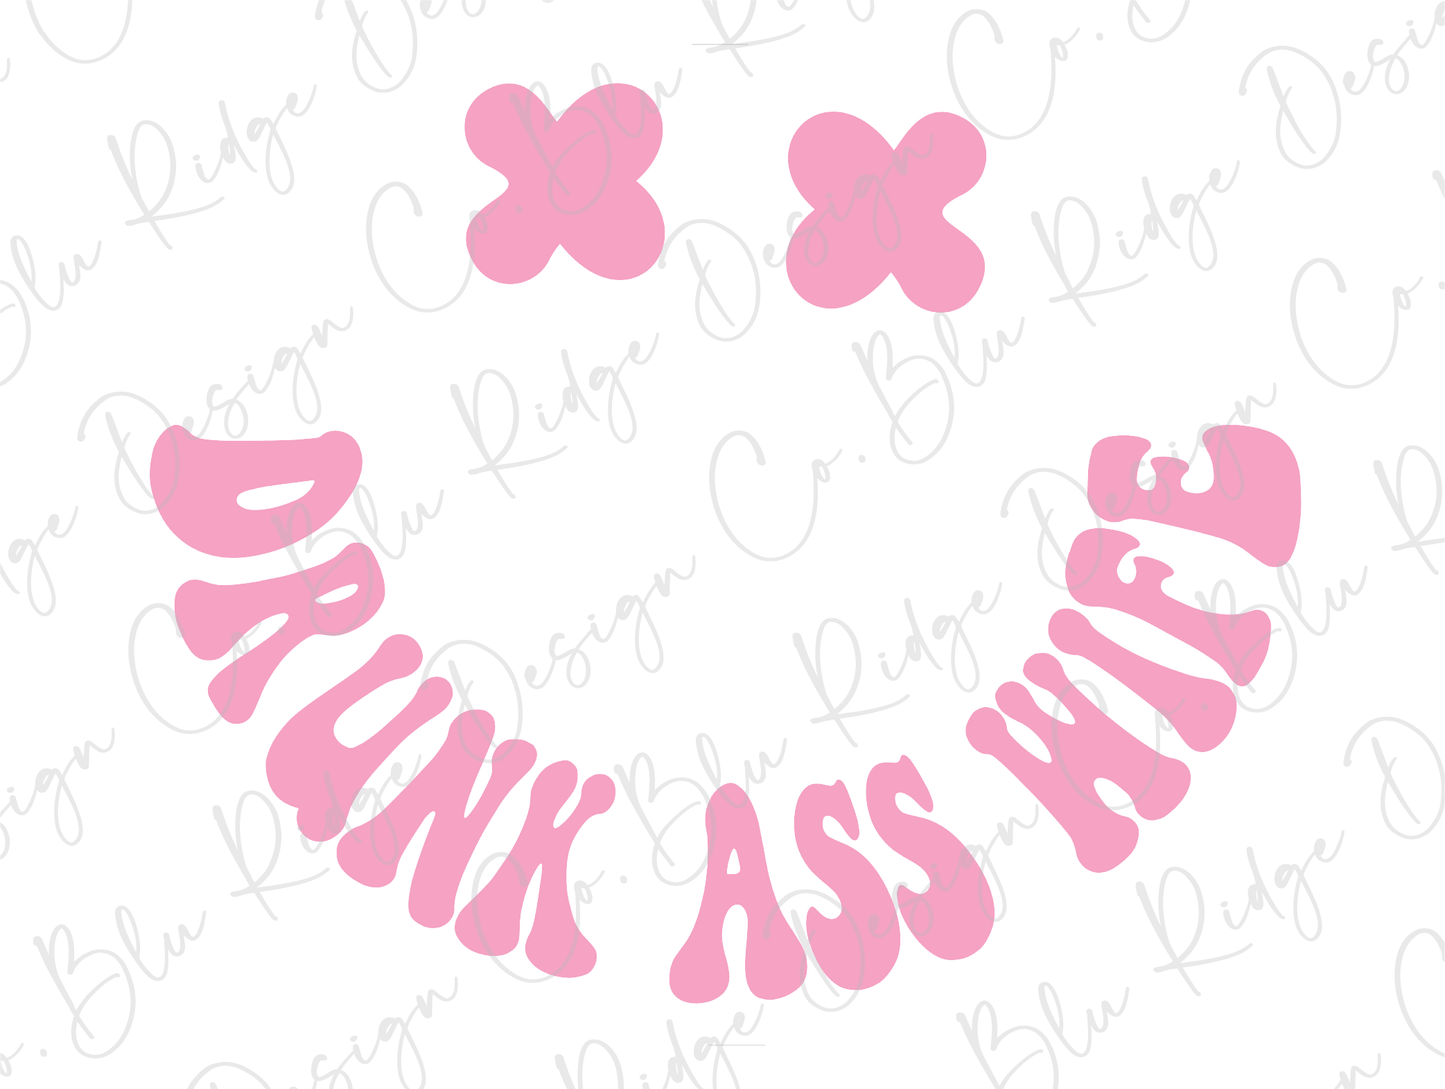 Drunk Ass Wife Good Vibes Smiley Face Pink Design Direct to Film (DTF) Transfer